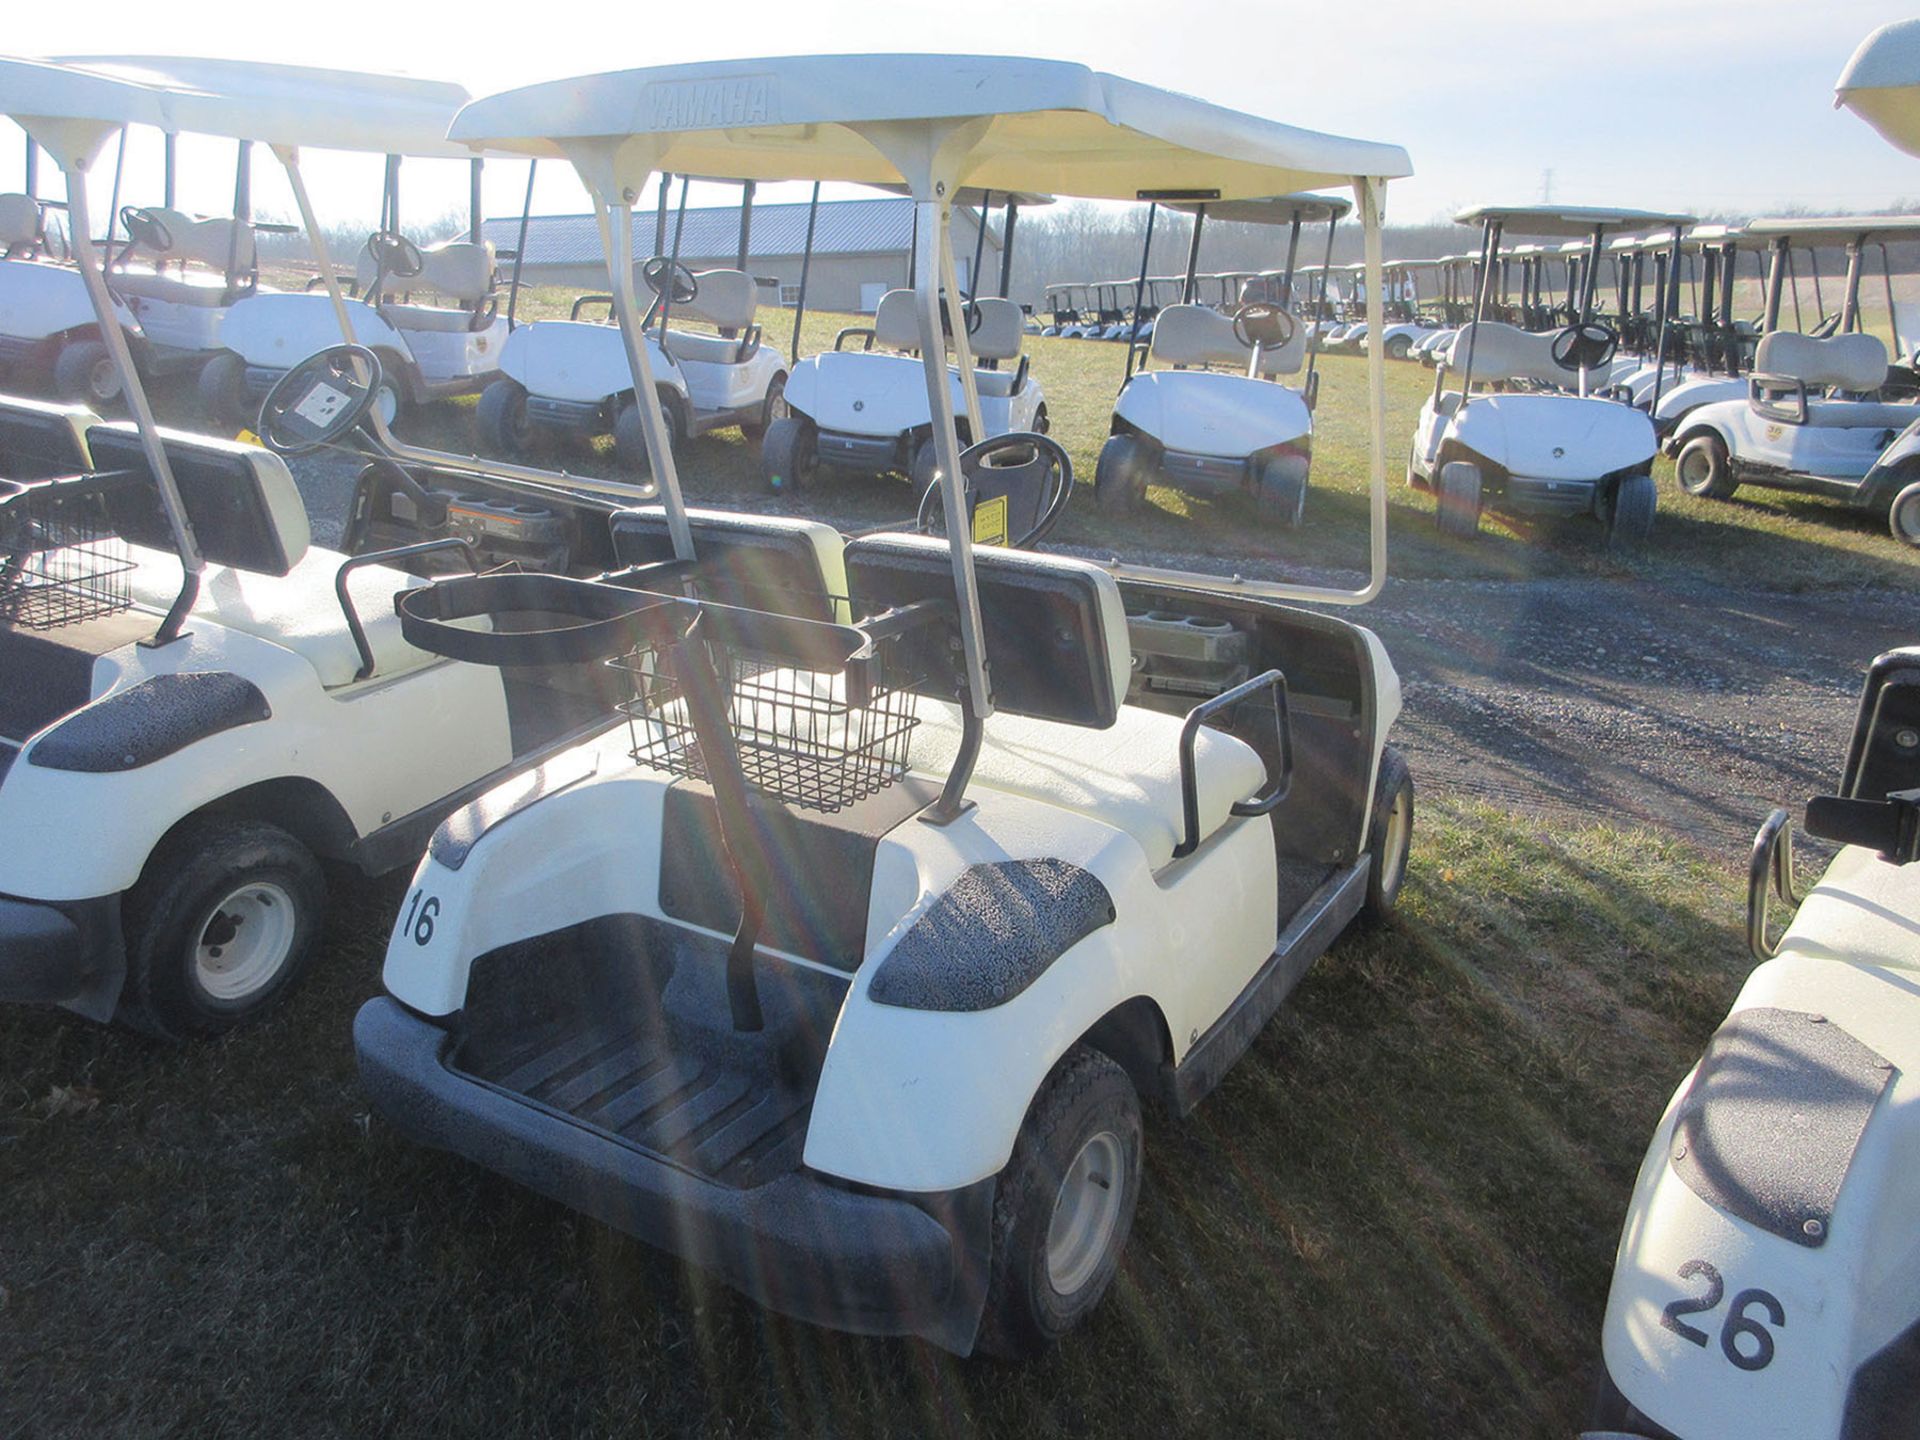 2006 YAMAHA GAS GOLF CART; MODEL G22A, S/N JUO-211834 - Image 2 of 2